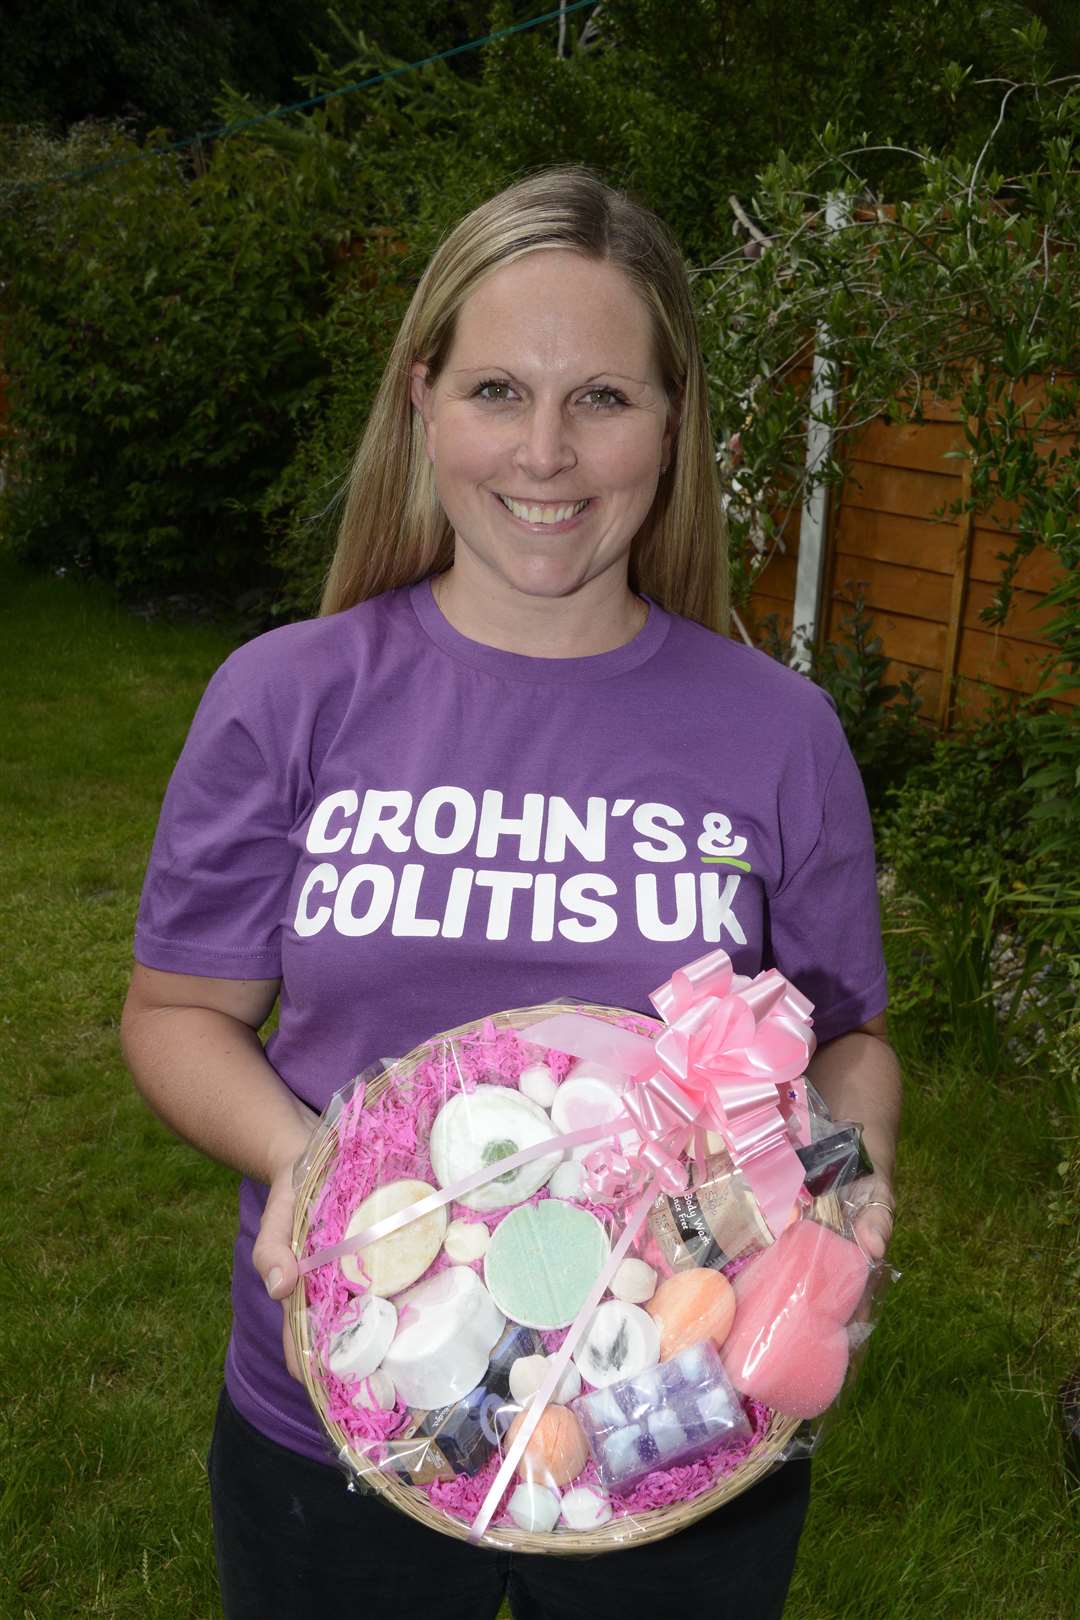 Debbie Hyland is having a pamper evening to raise funds for Crohn's and Colitis UK